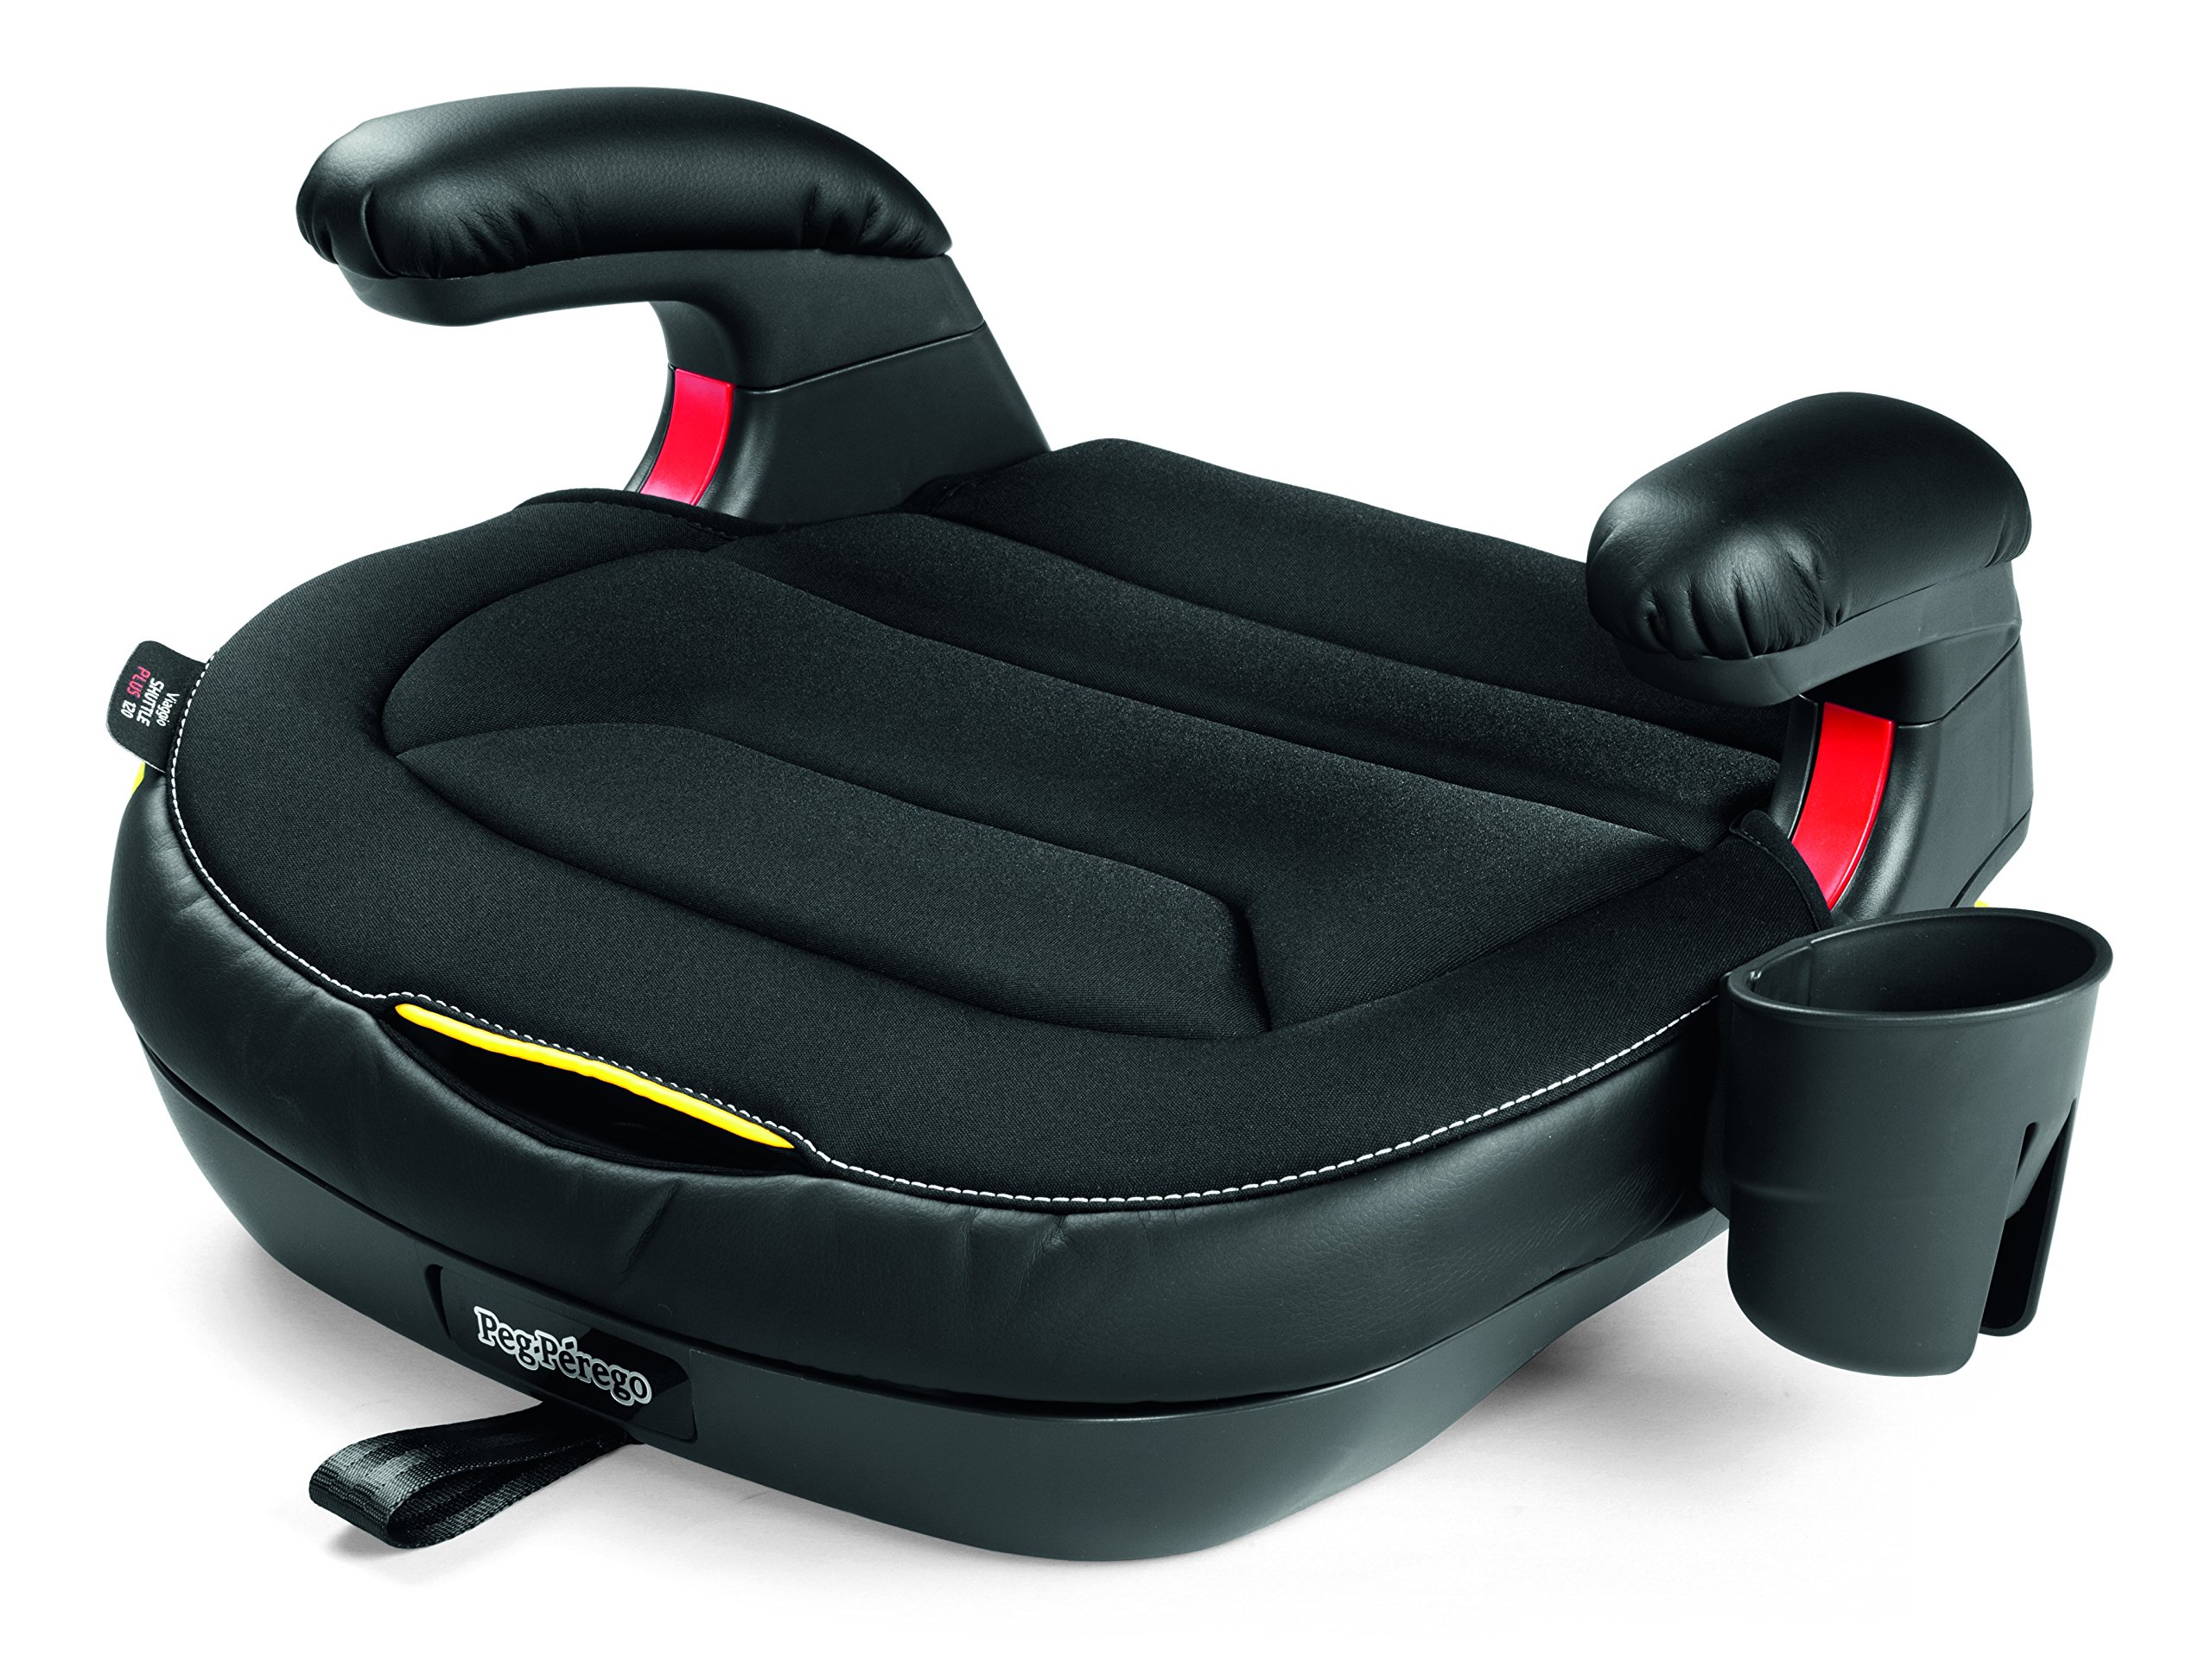 Peg Perego Viaggio Shuttle Plus 120 - Booster Car Seat - for Children from 40 to 120 lbs - Made in Italy - Licorice (Black)